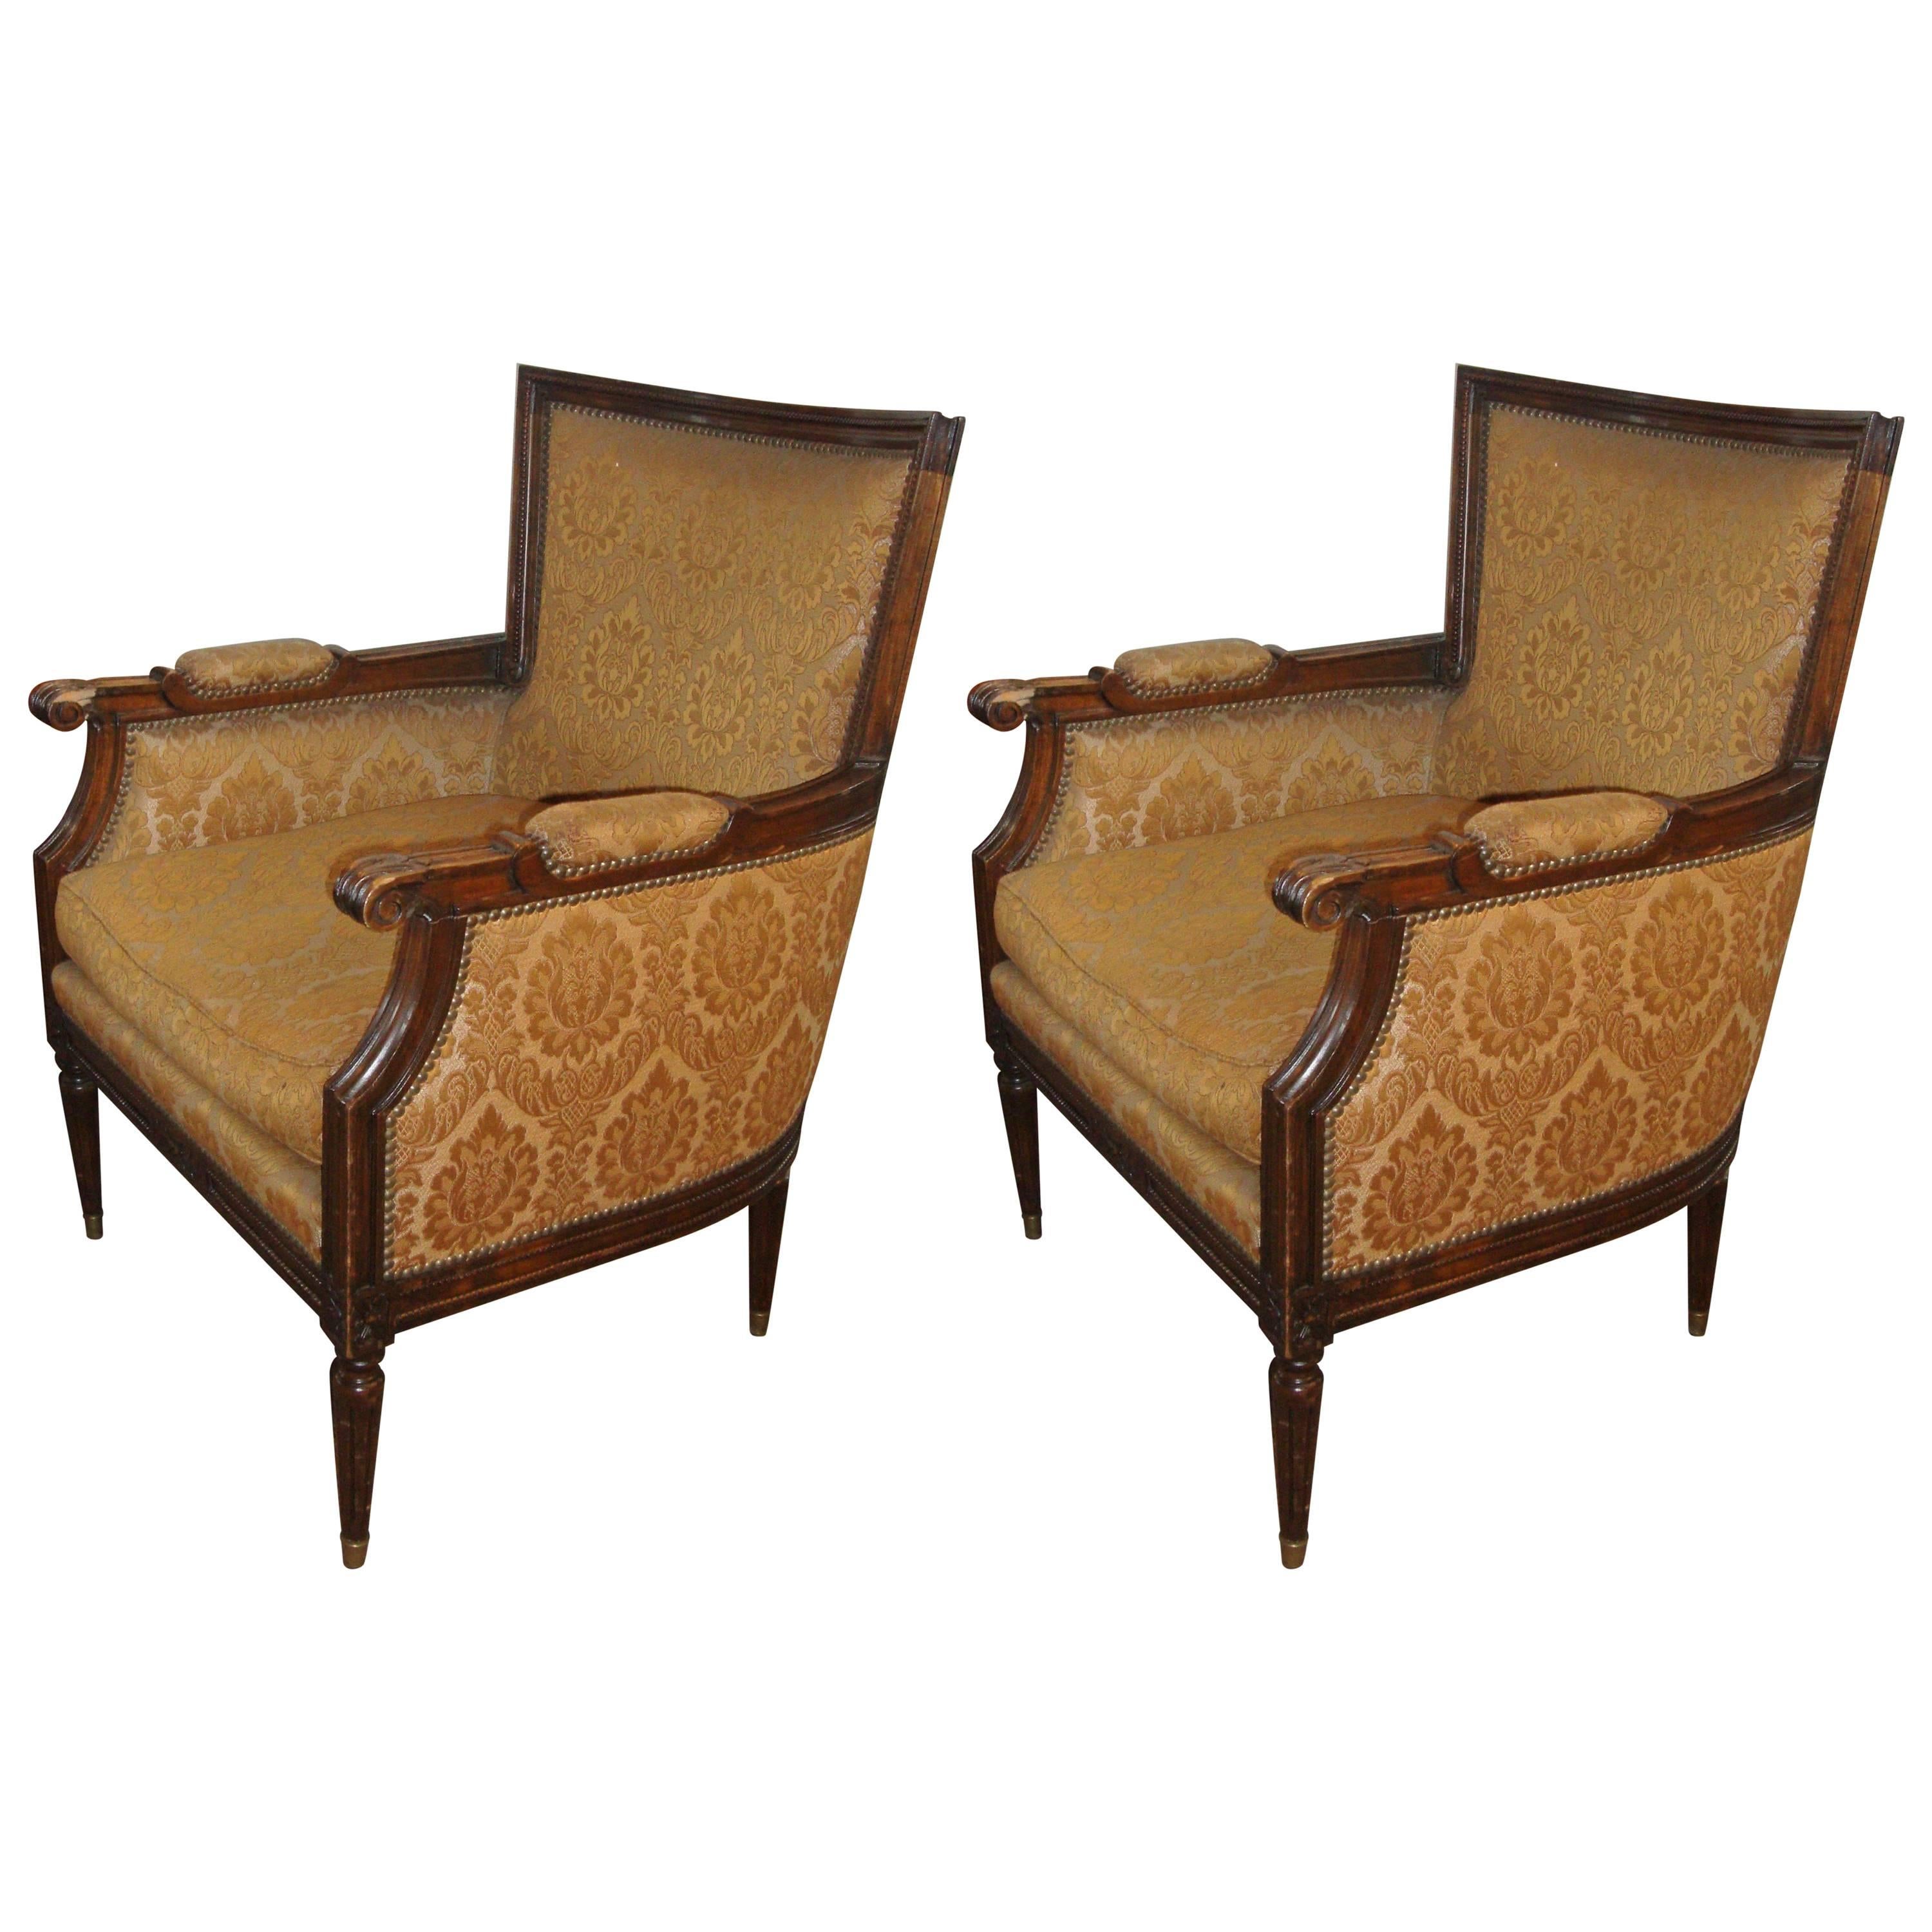 Pair Of Louis XVI Style Bergere Arm Office Chairs Manner Of Jansen